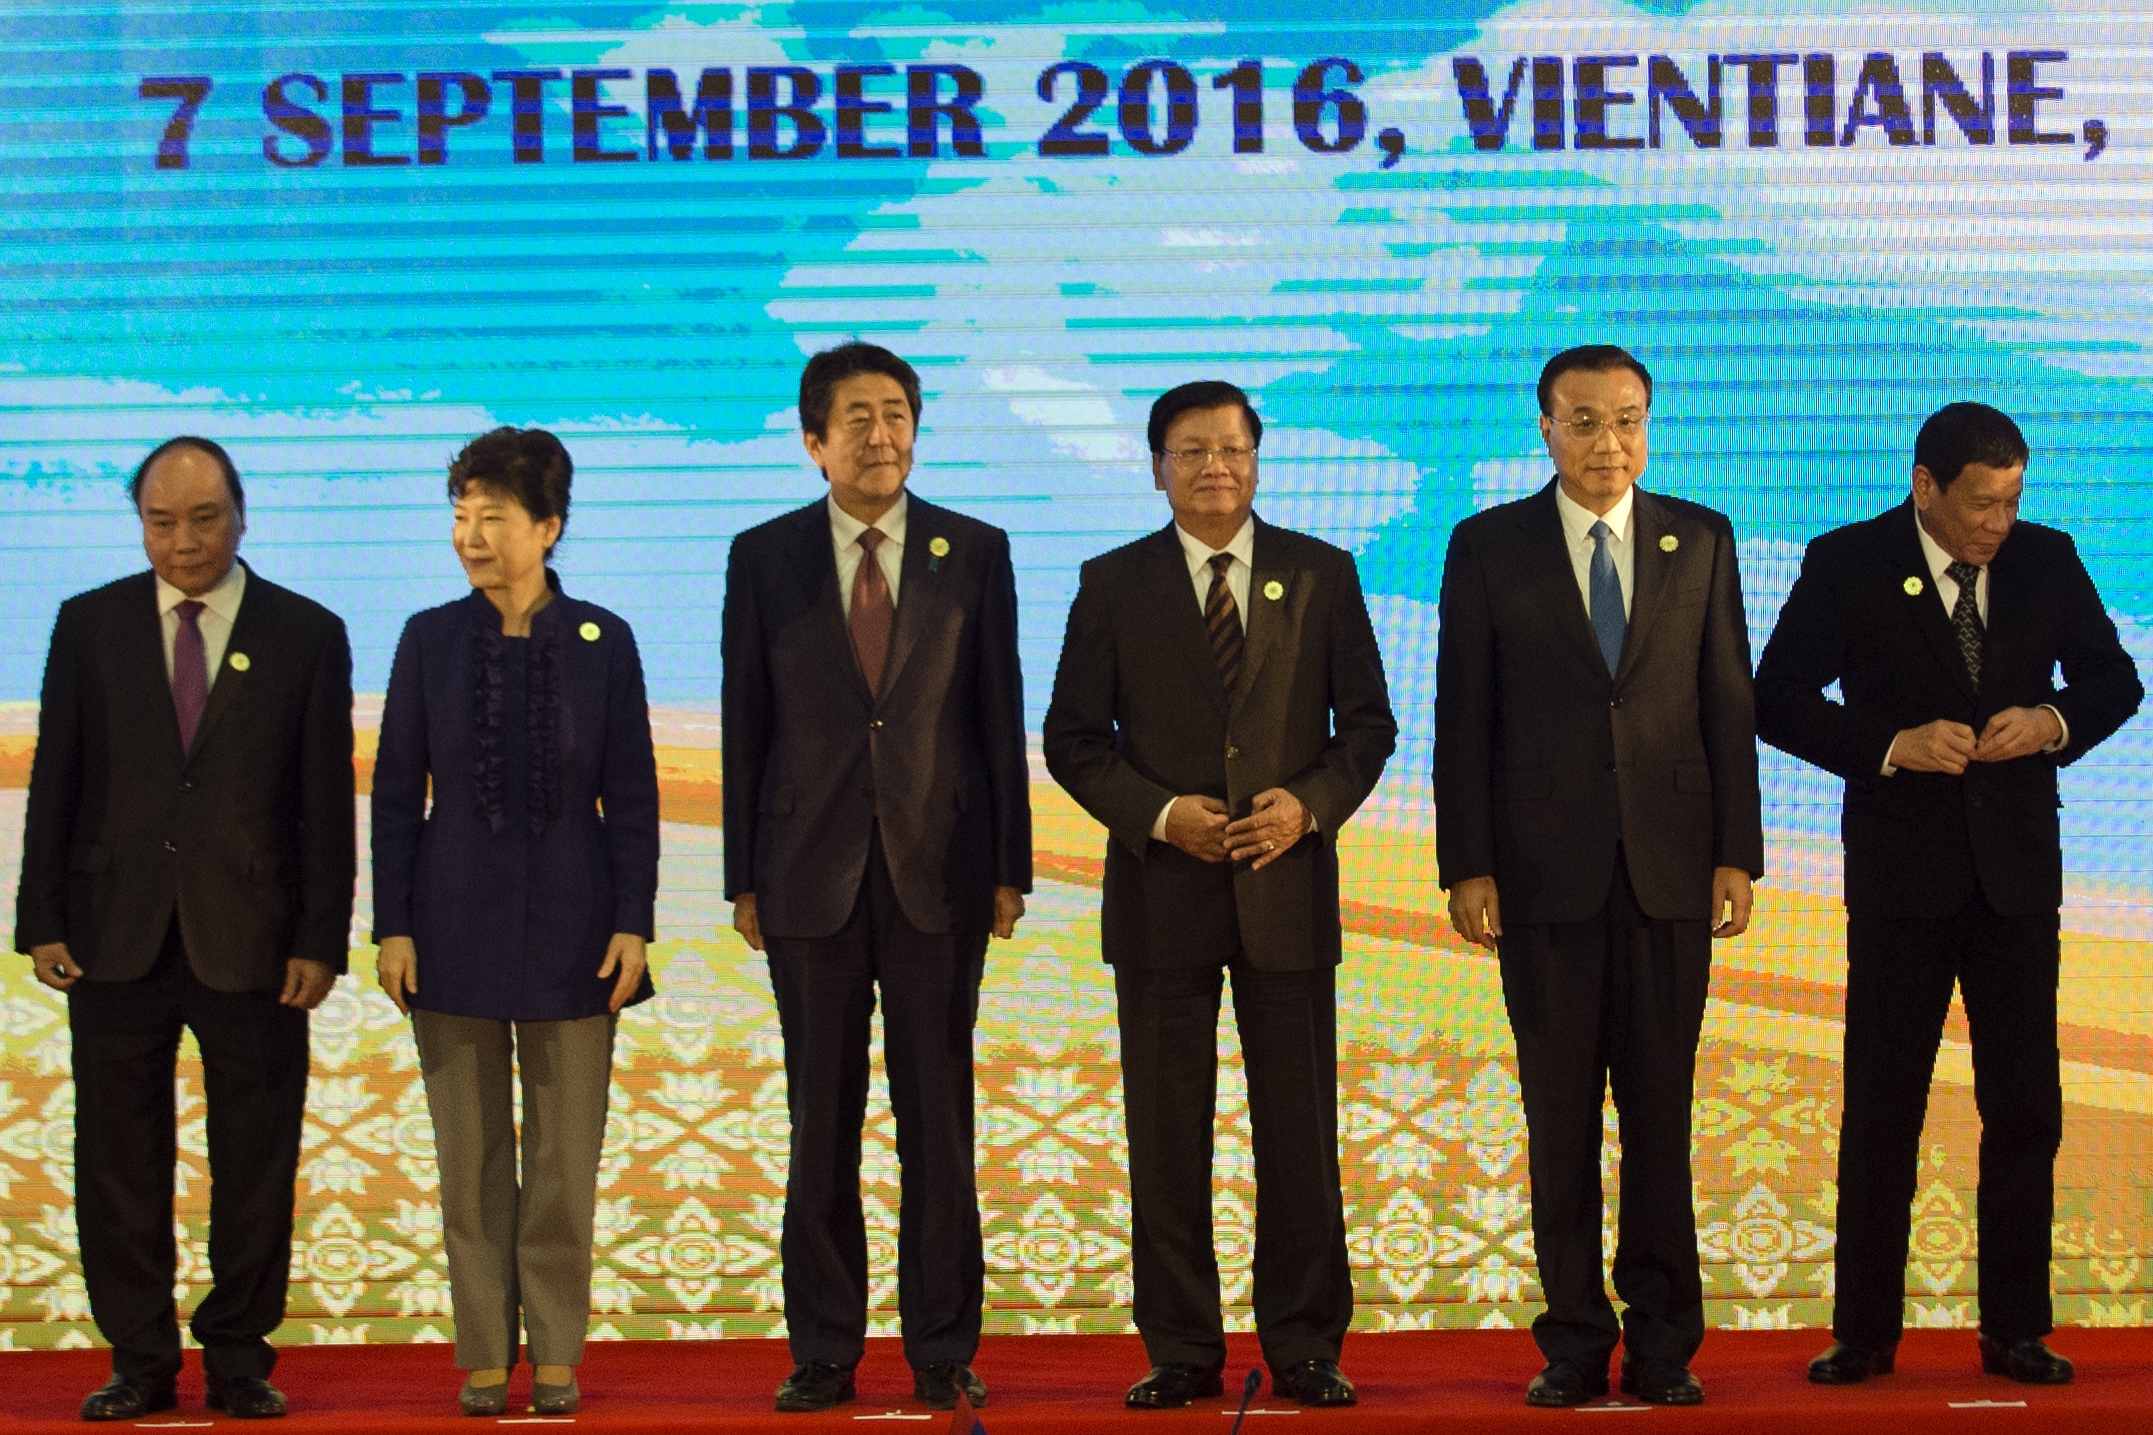 From L-R: Vietnam's Prime Minister Nguyen Xuan Phuc, South Korean President Park Geun-hye, Japanese Prime Minister Shinzo Abe, Laos Prime Minister Thongloun Sisoulith, Chinese Premier Li Keqiang and Philippine President Rodrigo Duterte pose for photos at the ASEAN Plus Three Summit in Vientiane on September 7, 2016.  The gathering will see the 10 ASEAN members meet by themselves, then with leaders from the US, Japan, South Korea and China.  / AFP PHOTO / YE AUNG THU